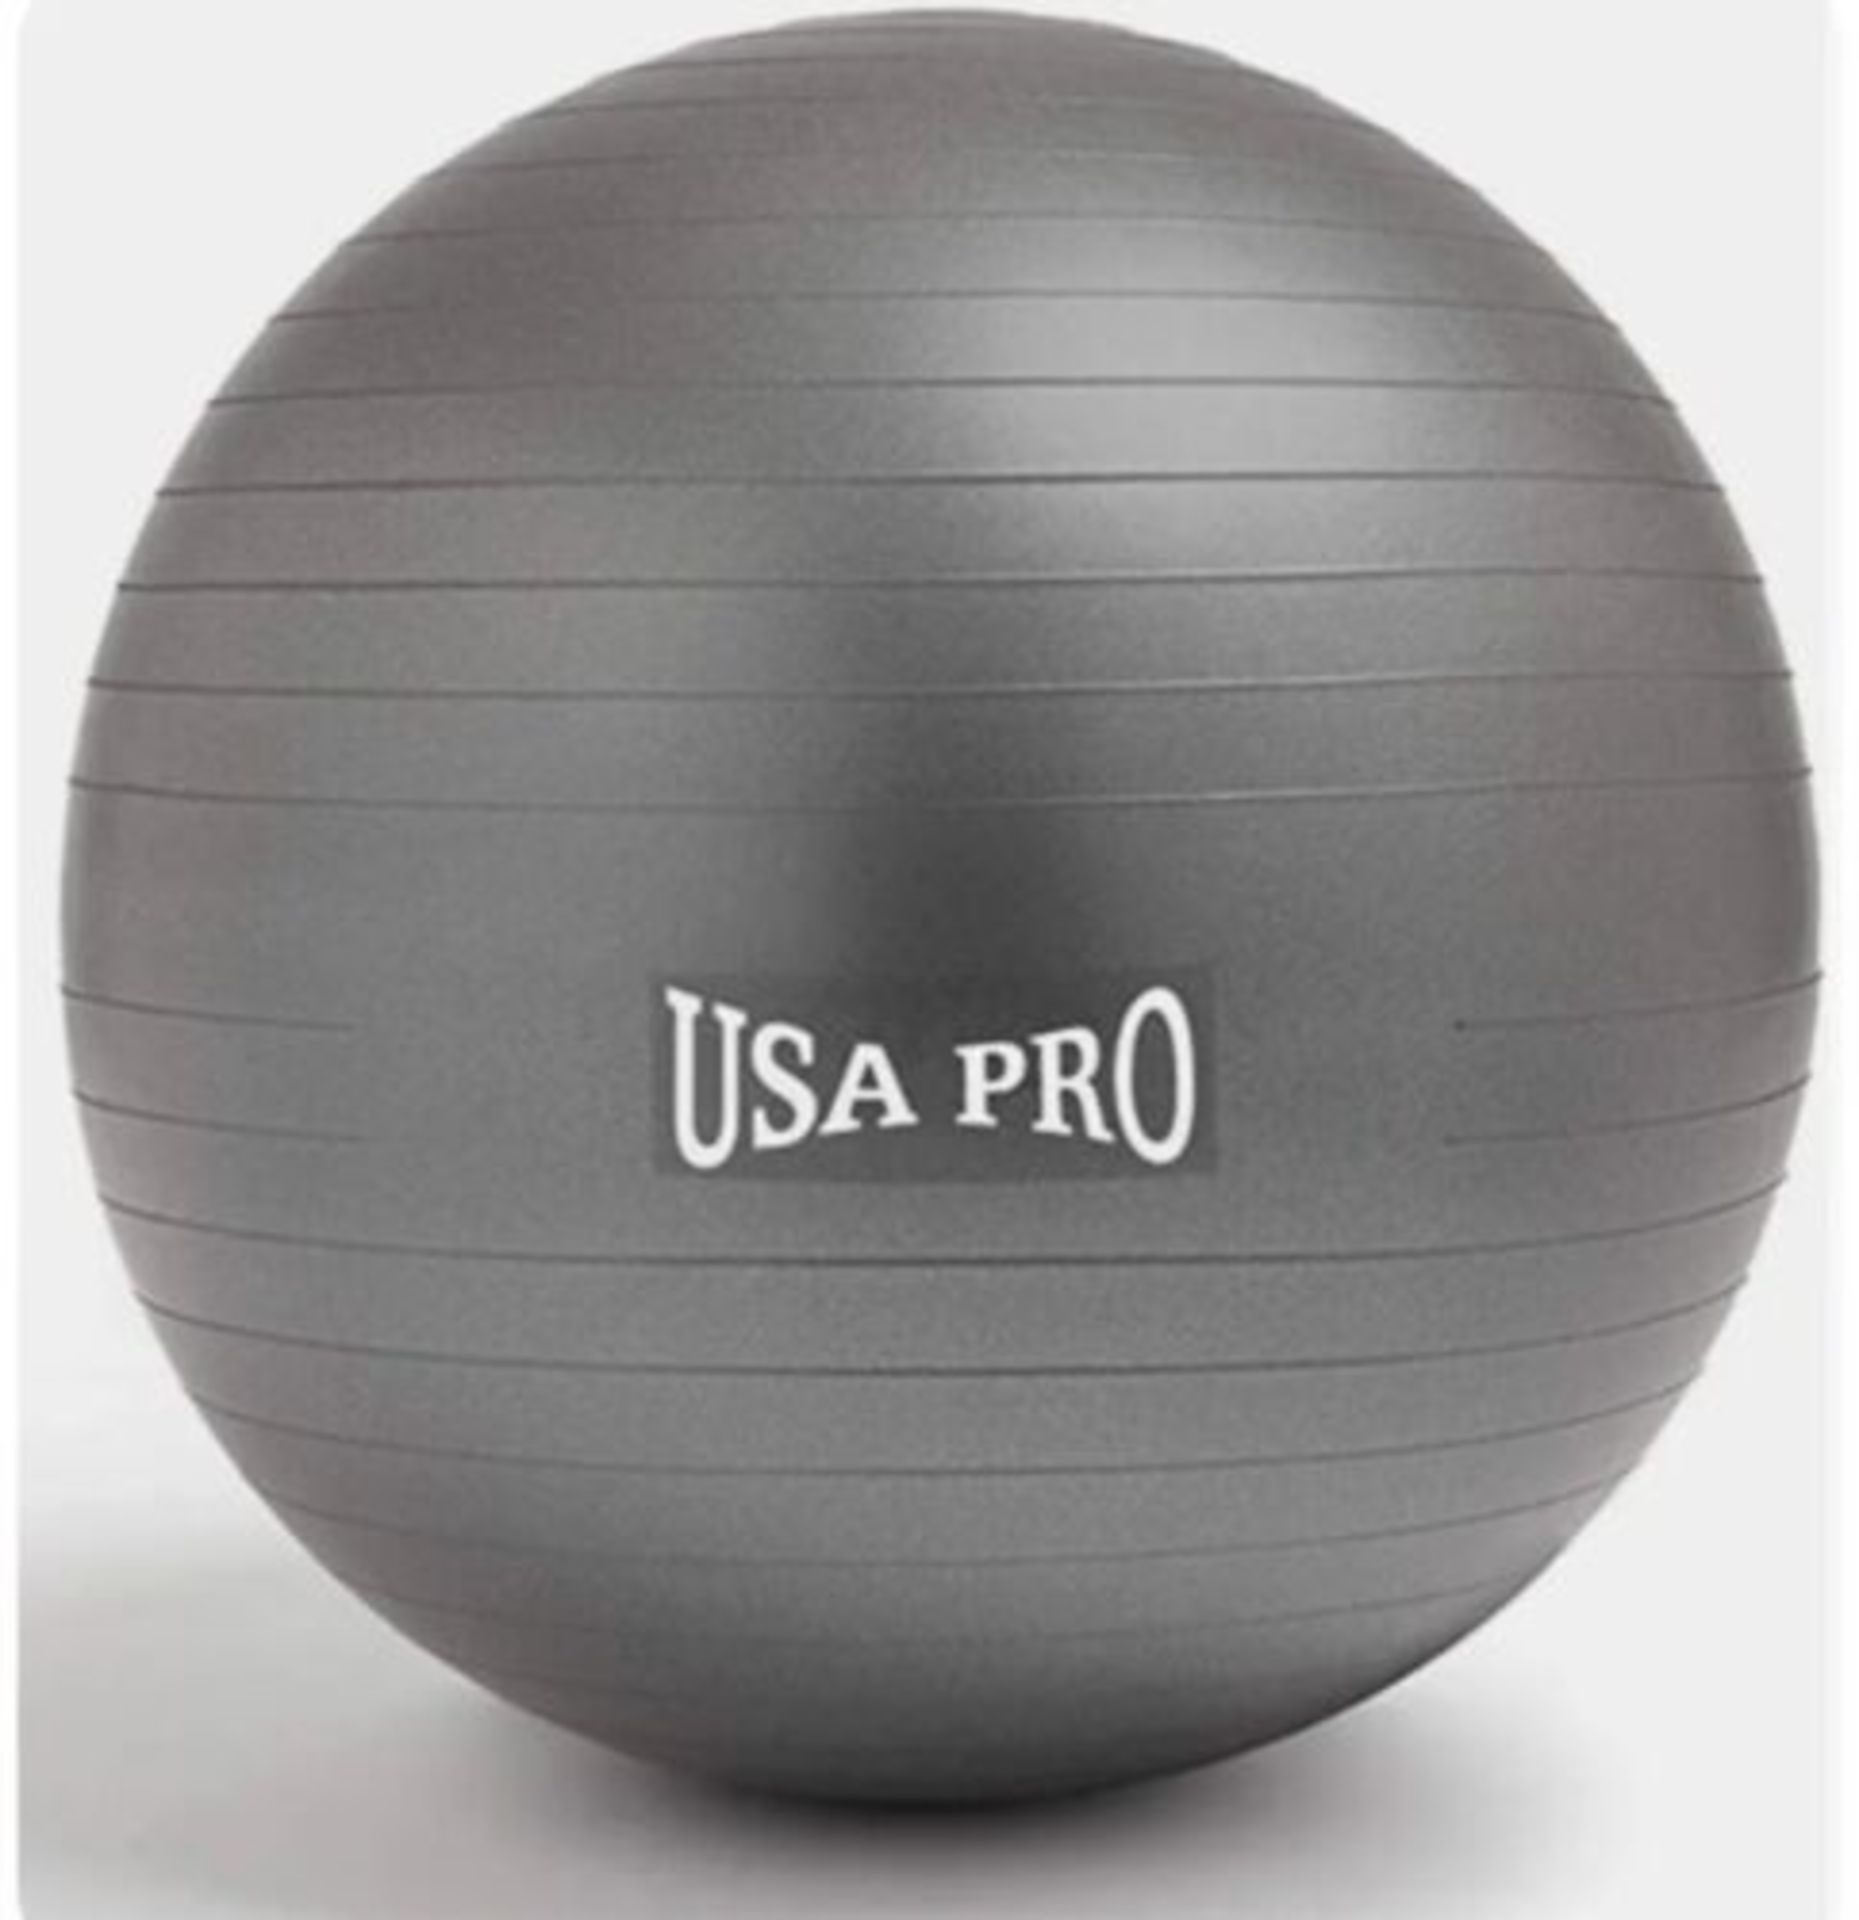 24 X BRAND NEW USA PRO EXERCISE BALL SIZE 55CM WITH PUMP INCLUDED - IN 2 BOXES - Image 2 of 2